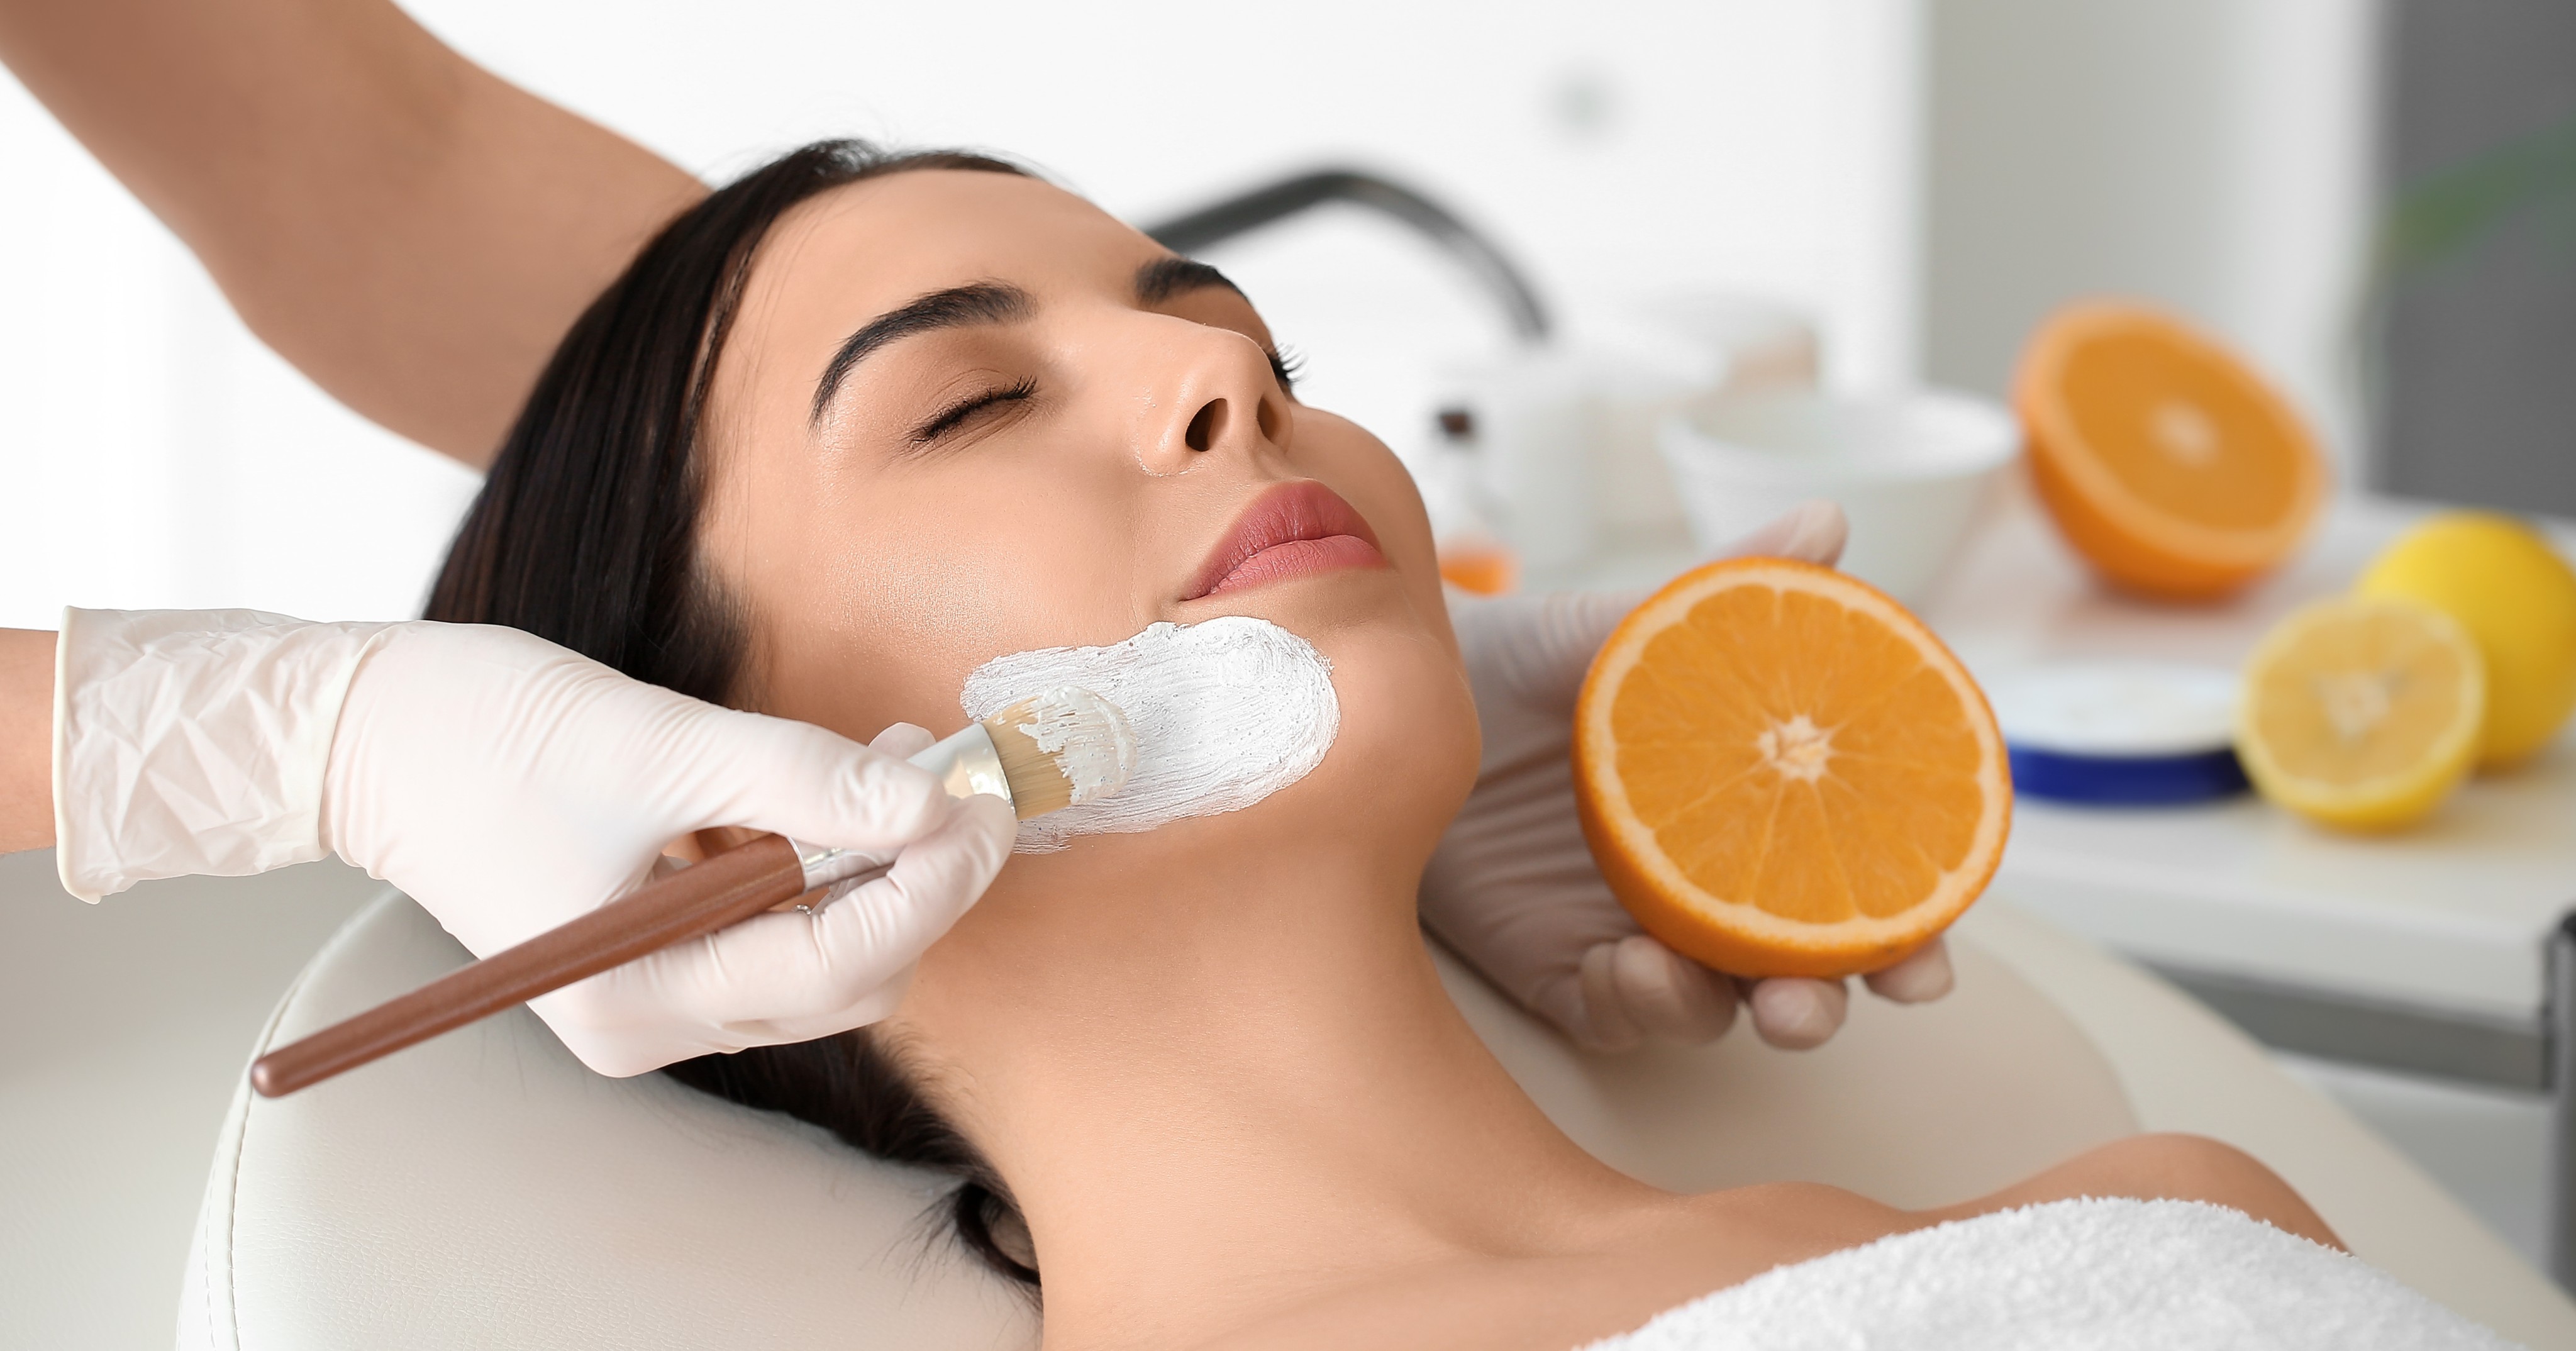 Products containing vitamin C claim they can not only brighten and tighten your skin, but also reduce the appearance of ageing. Photo: Shutterstock